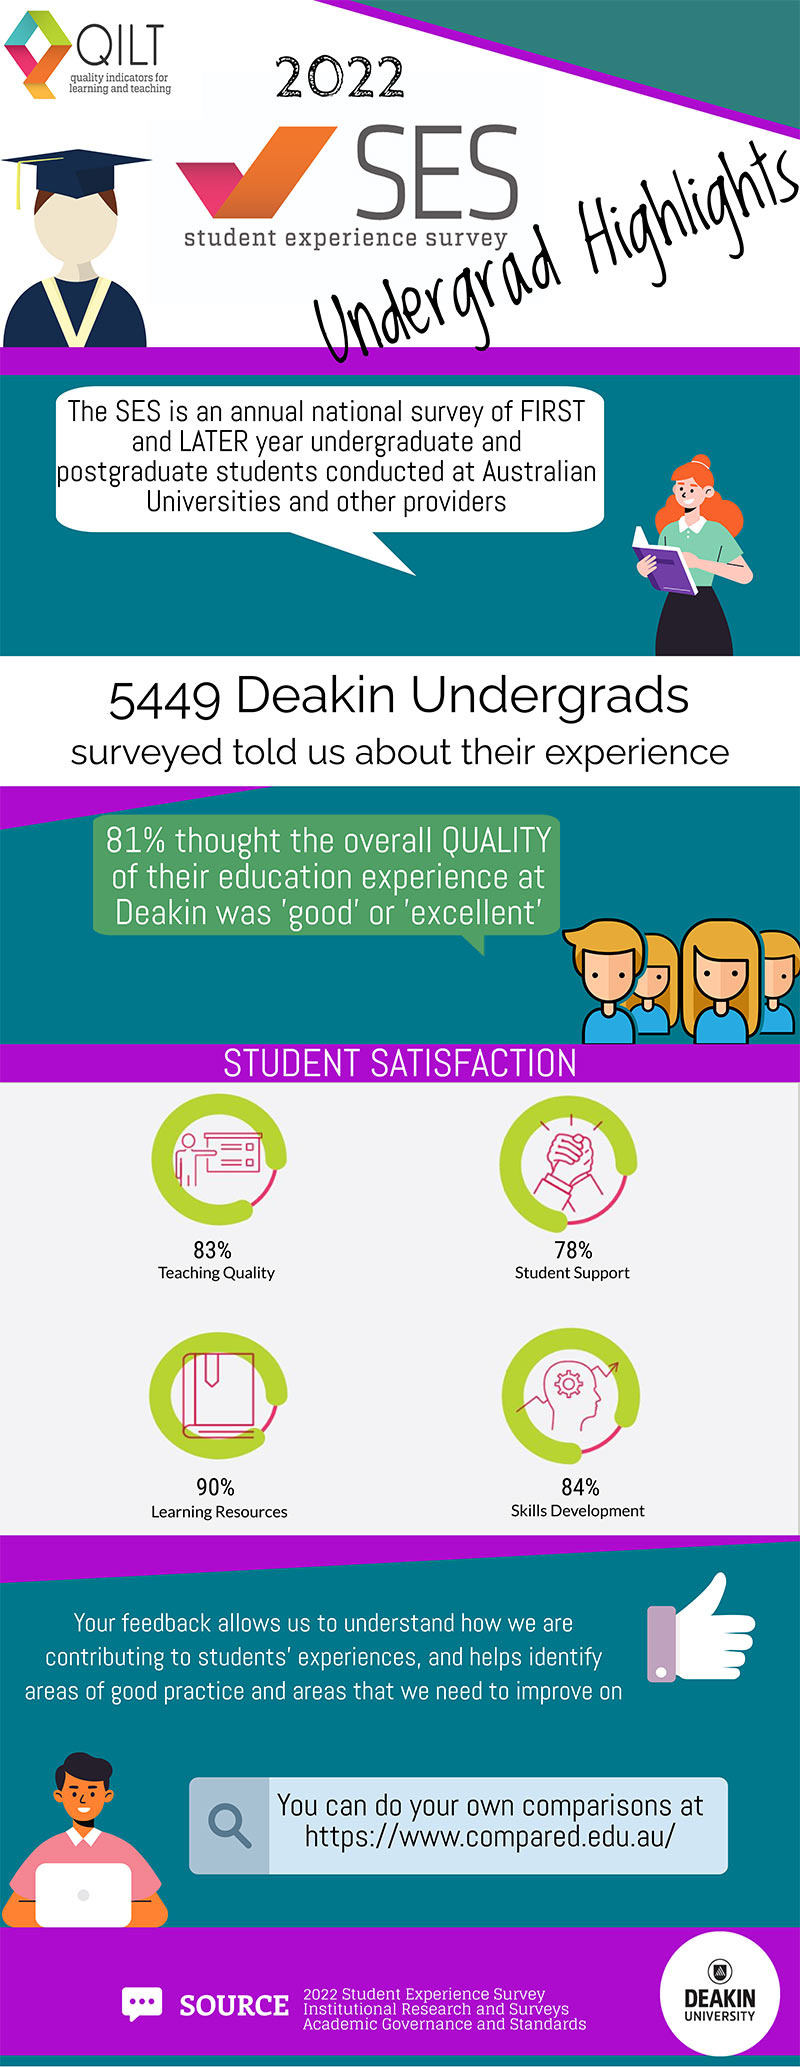 2022 Student experience survey undergrad highlights infographic, see second tab for text version